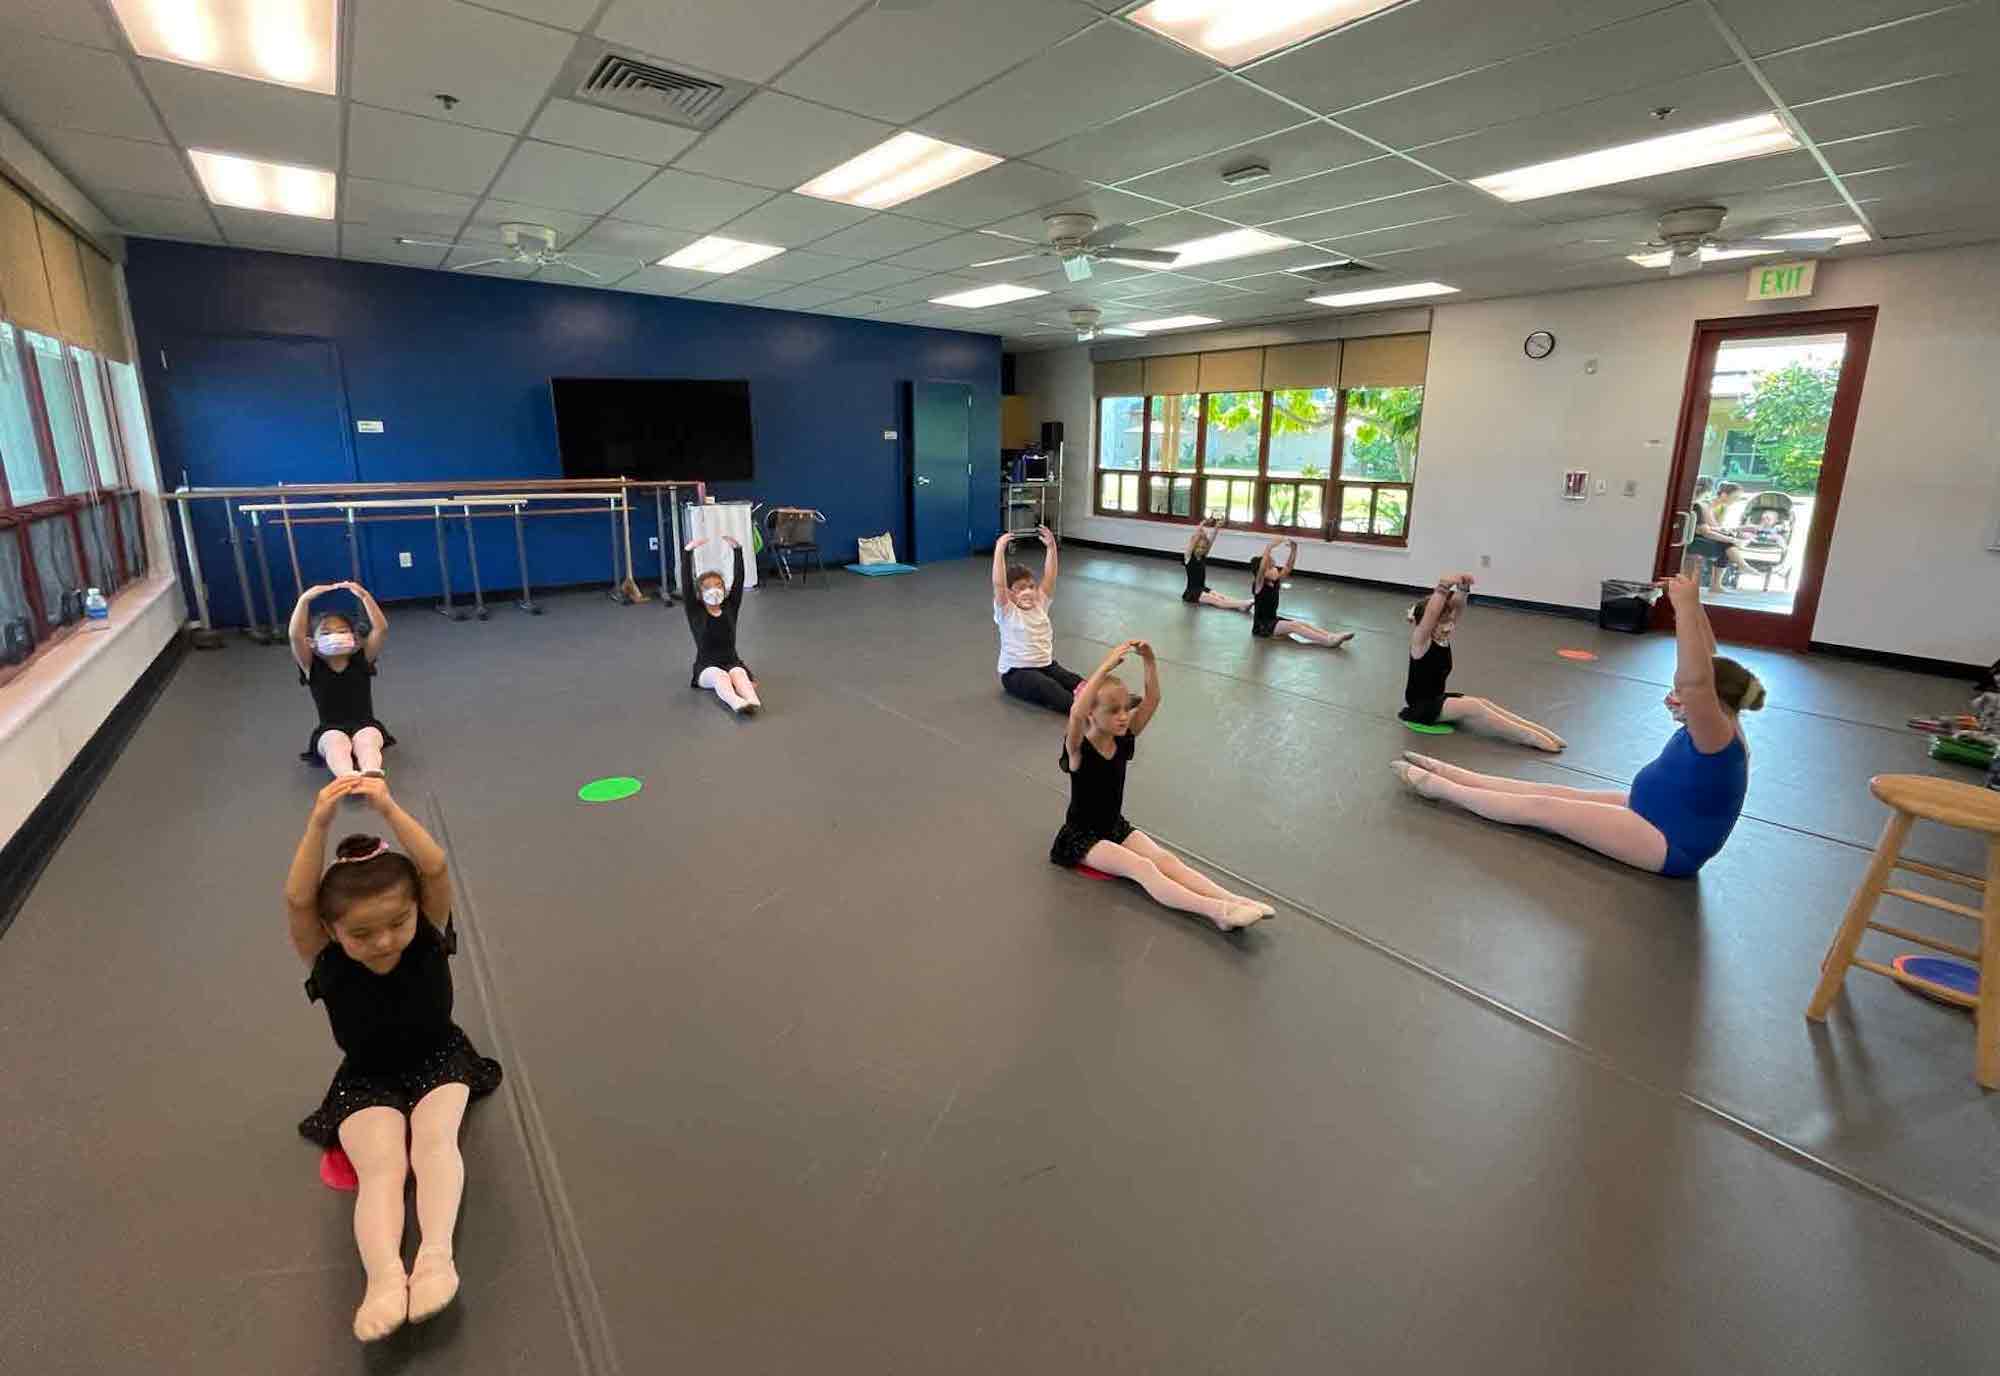 In Kapolei, Kroc Dance Academy brings the joy of dance to all